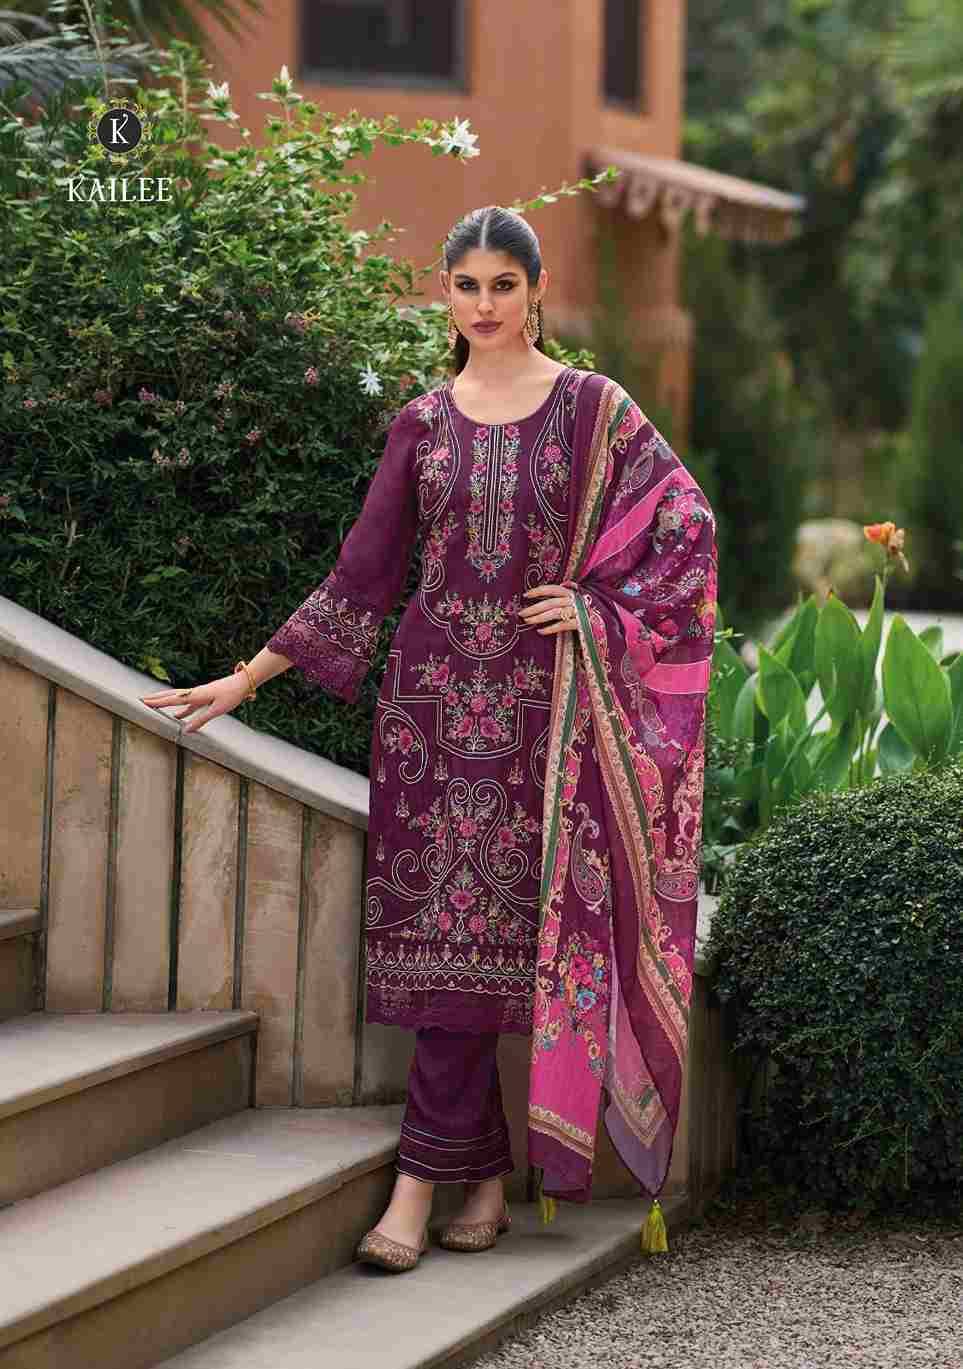 Sifaara By Kailee 42441 To 42444 Series Beautiful Stylish Festive Suits Fancy Colorful Casual Wear & Ethnic Wear & Ready To Wear Viscose Muslin Embroidered Dresses At Wholesale Price